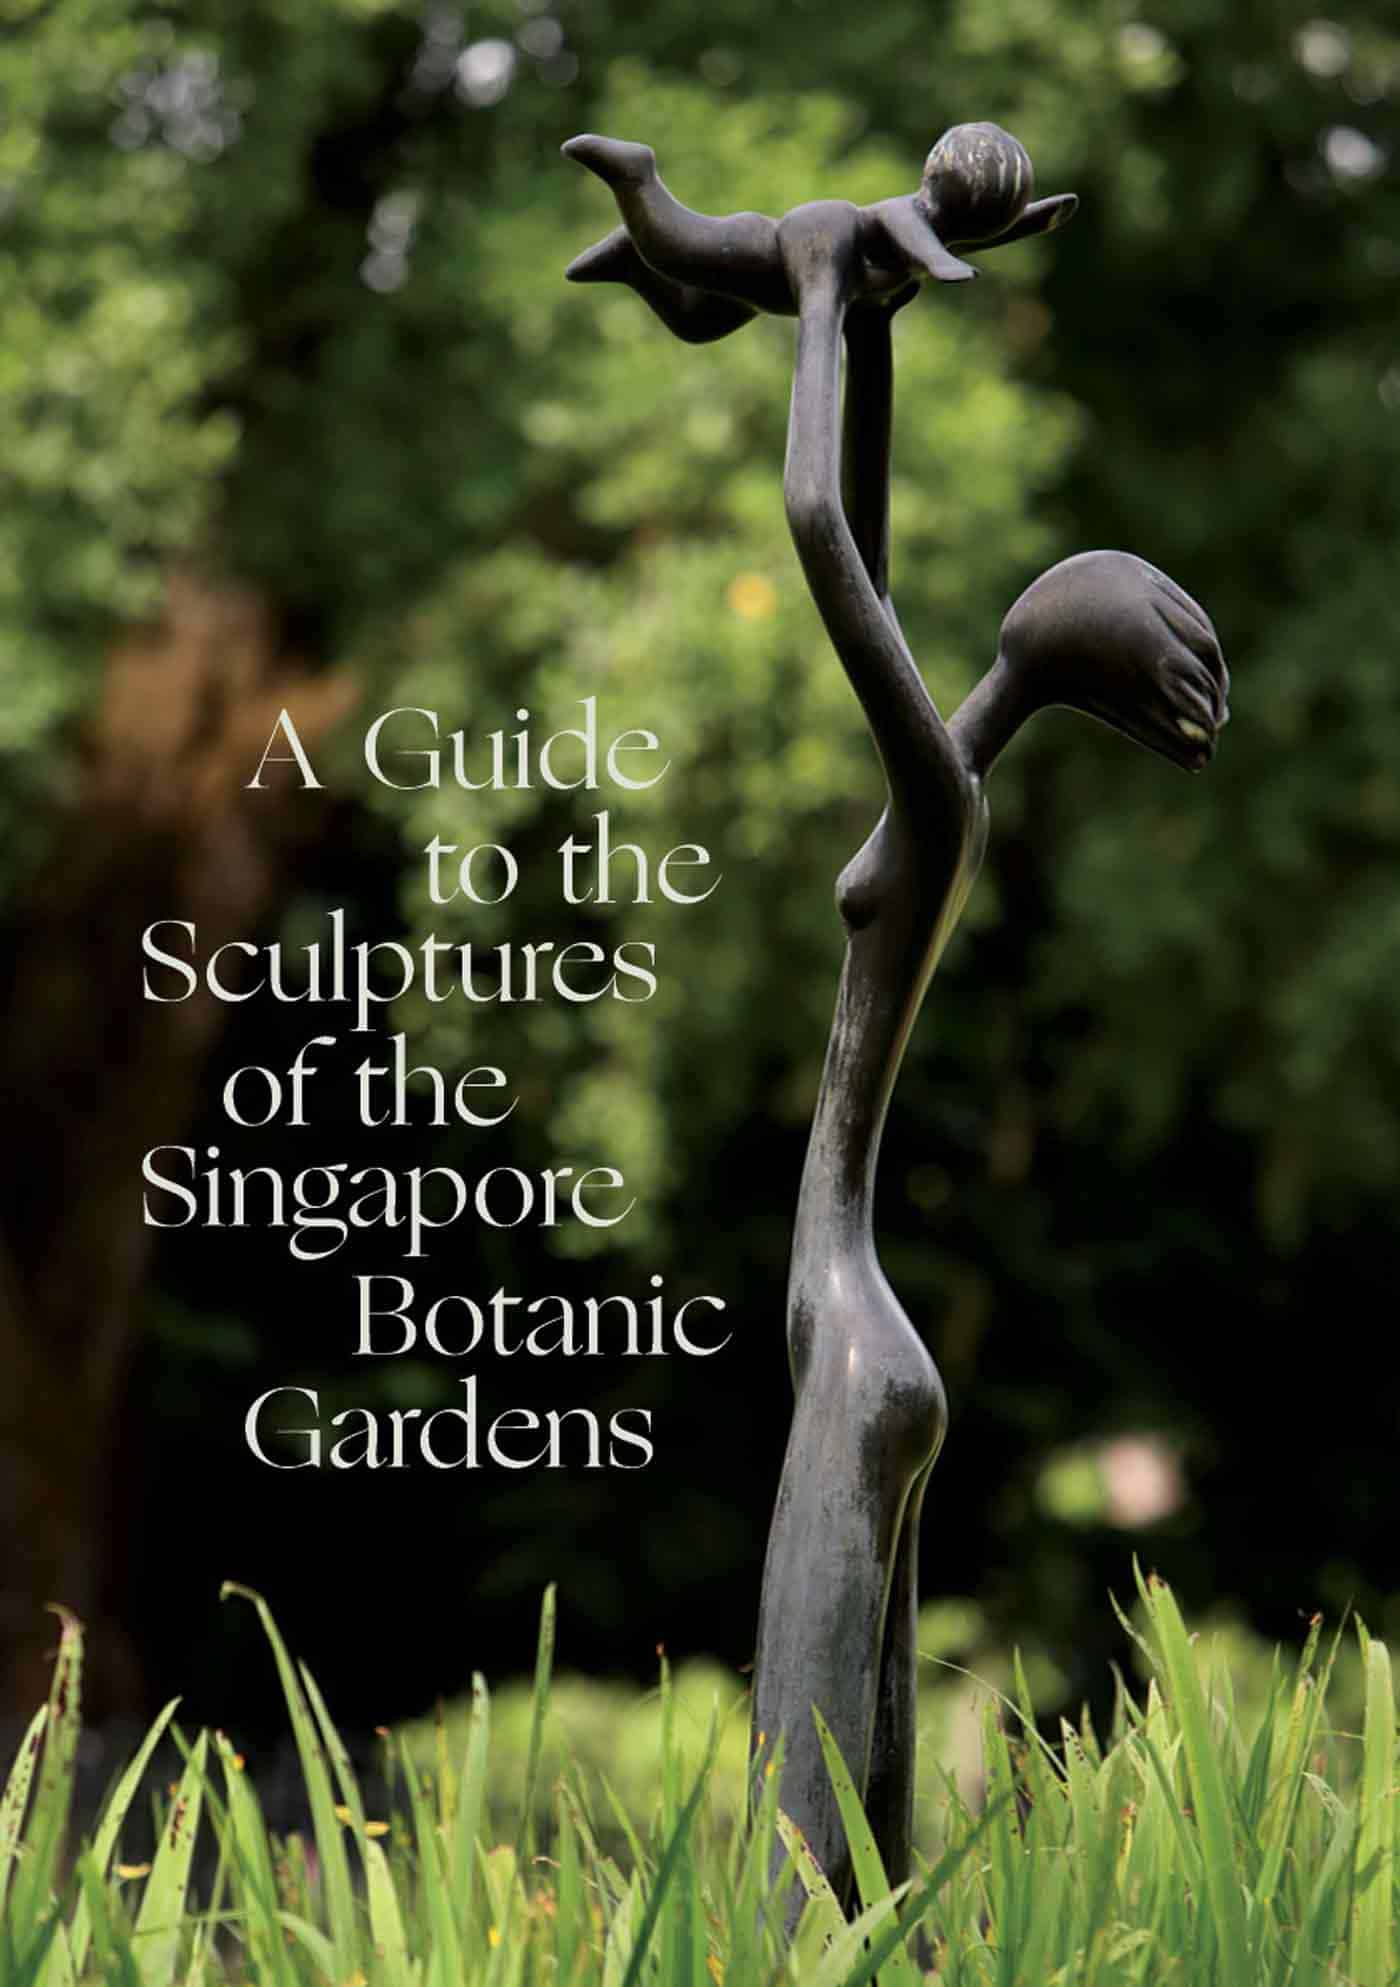 A Guide to the Sculptures of the Singapore Botanic Gardens